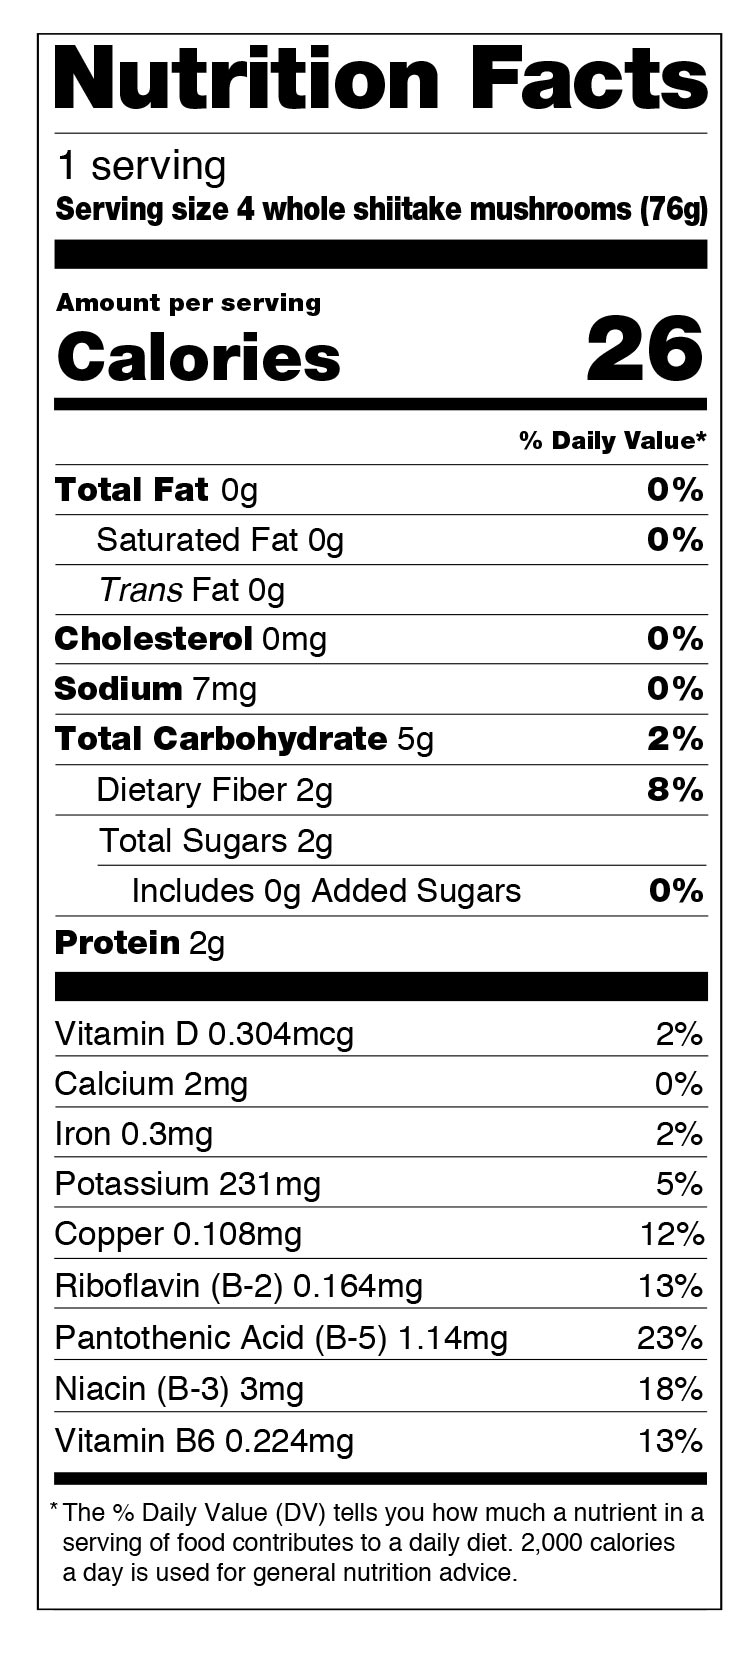 Nutrition facts for raw shiitake mushrooms